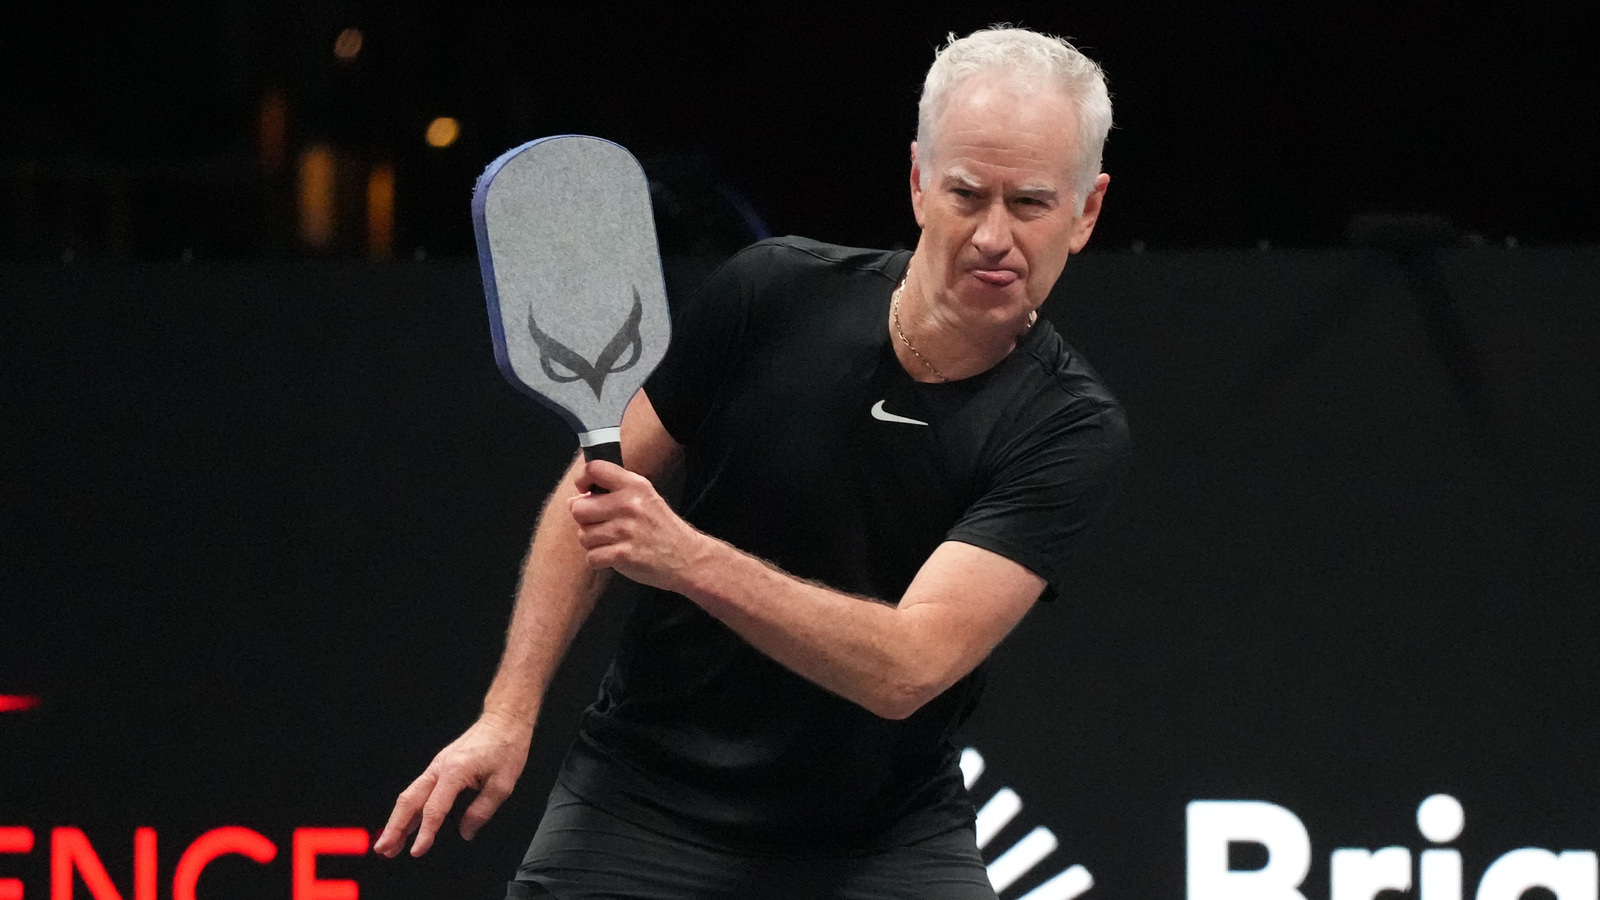 At 65 years young, John McEnroe signs up as the Global Tennis Ambassador for Pepperstone as the ‘Bad boy of tennis’ embarks on a new career adventure